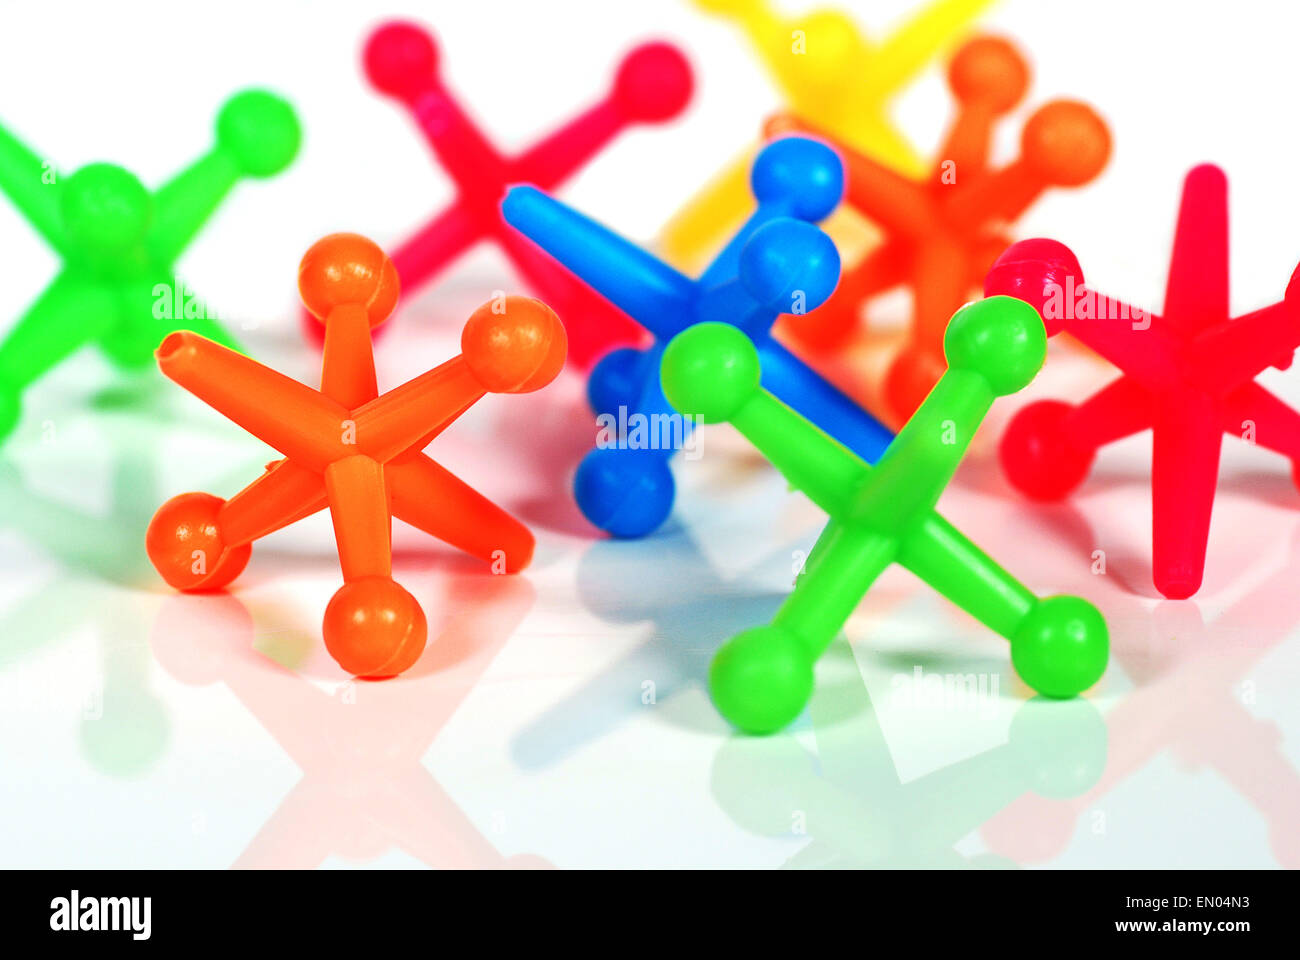 Extreme close up of colorful toy jacks on white with reflection. Stock Photo